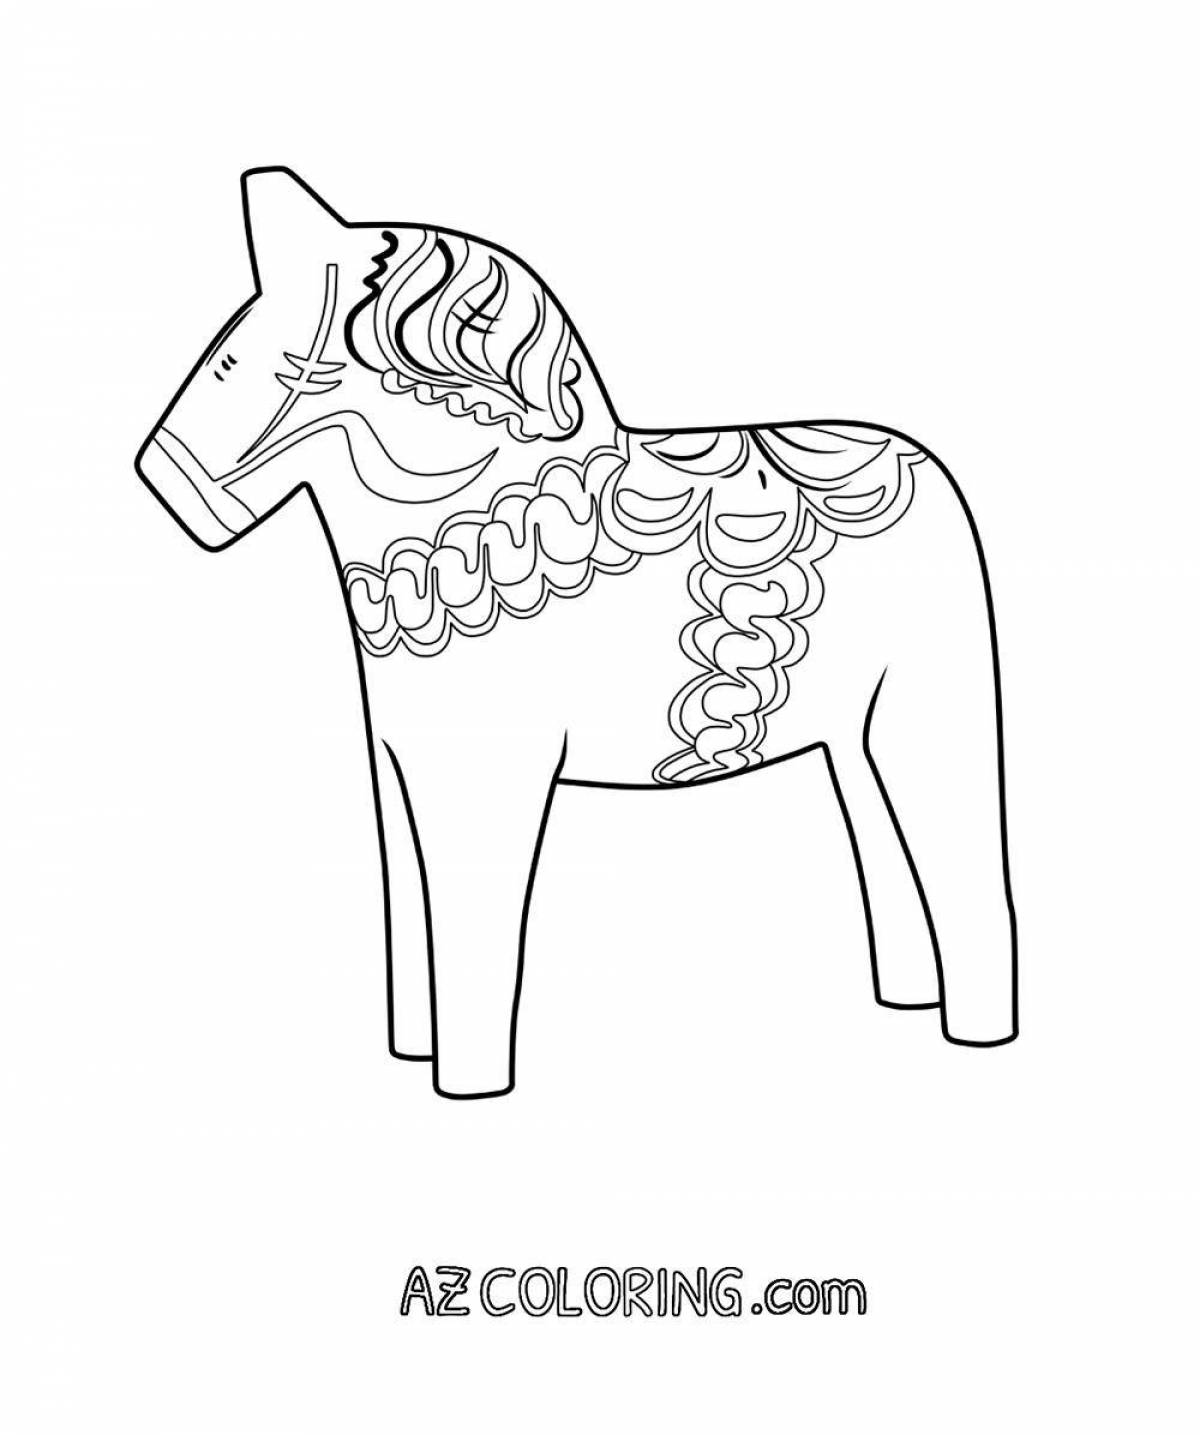 Attractive Gorodets toy coloring book